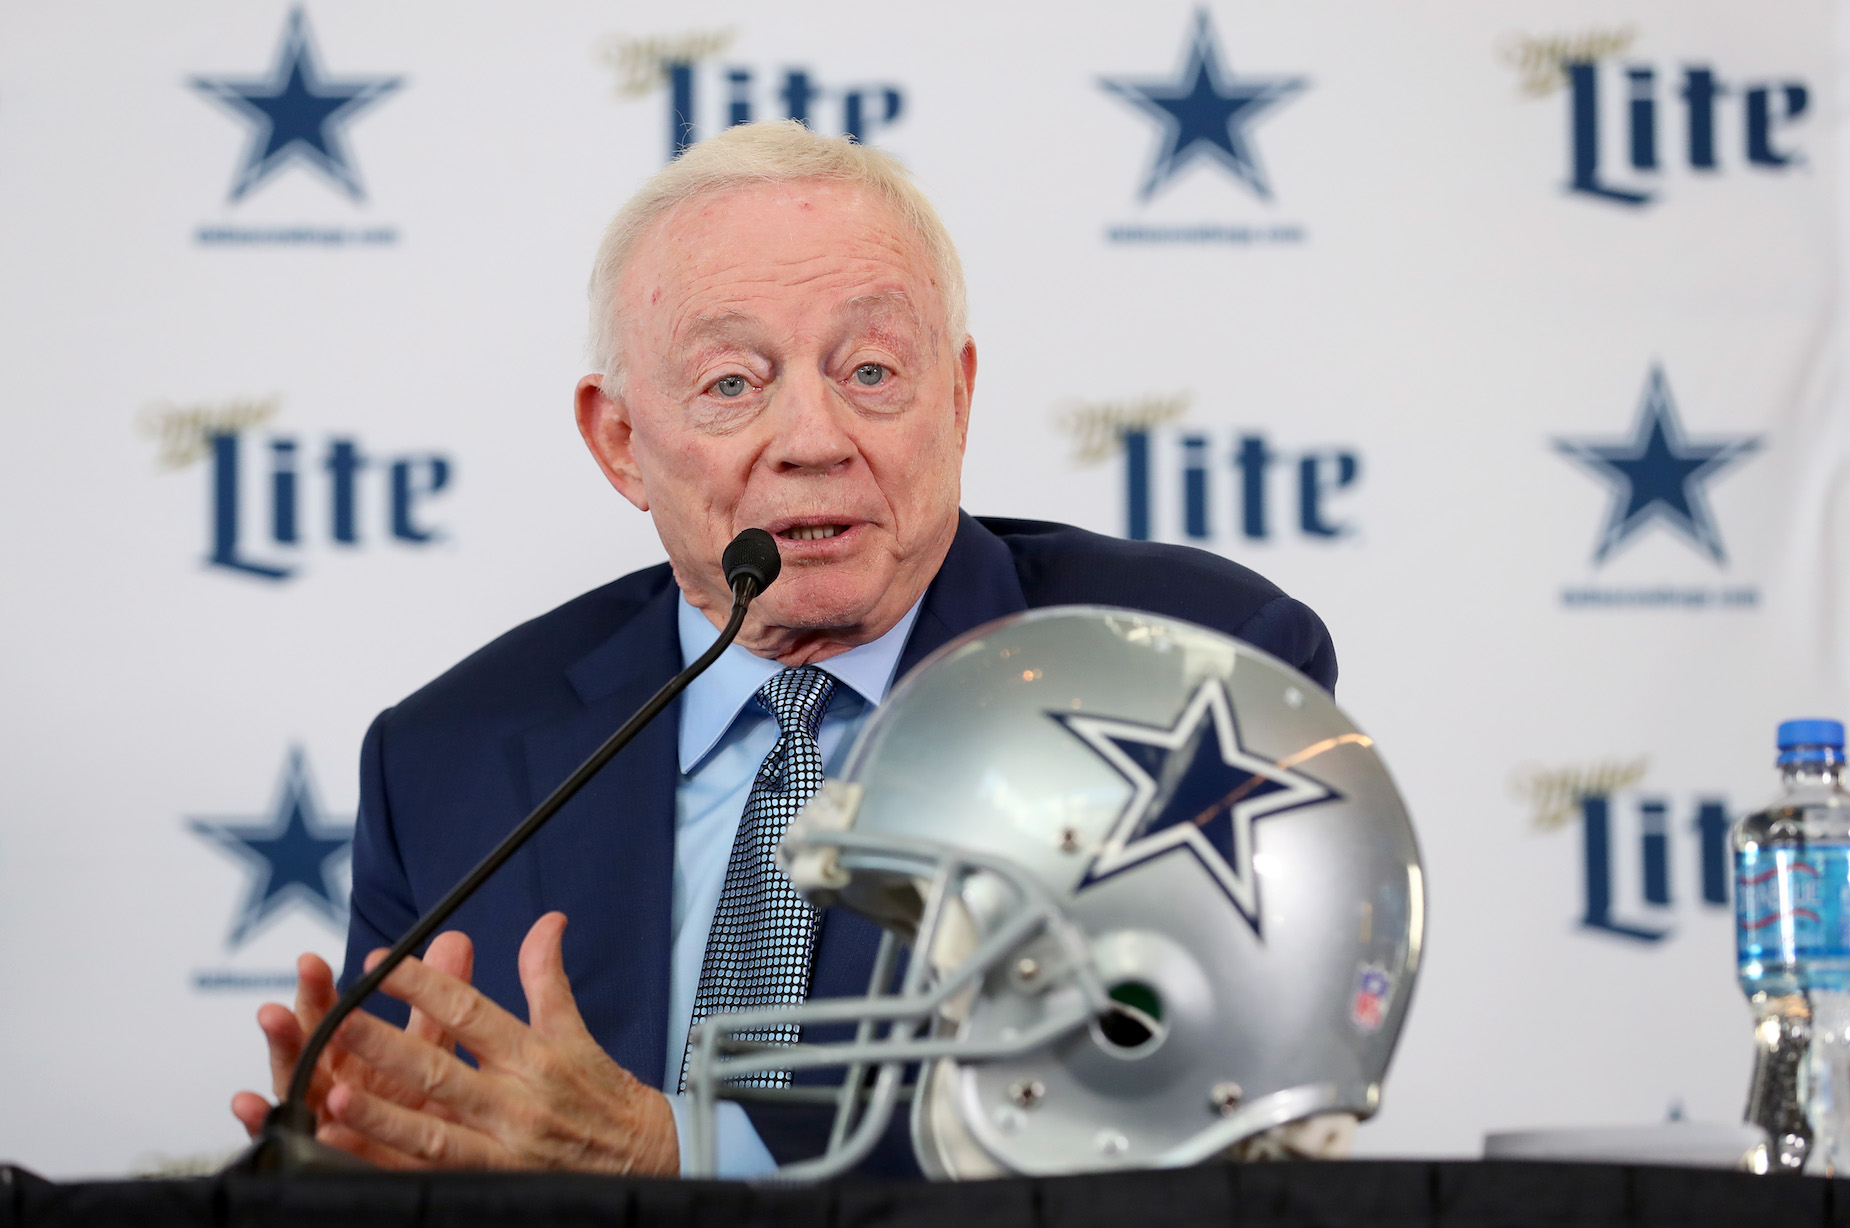 Dallas Cowboys owner Jerry Jones isn't very popular in the state of Texas.